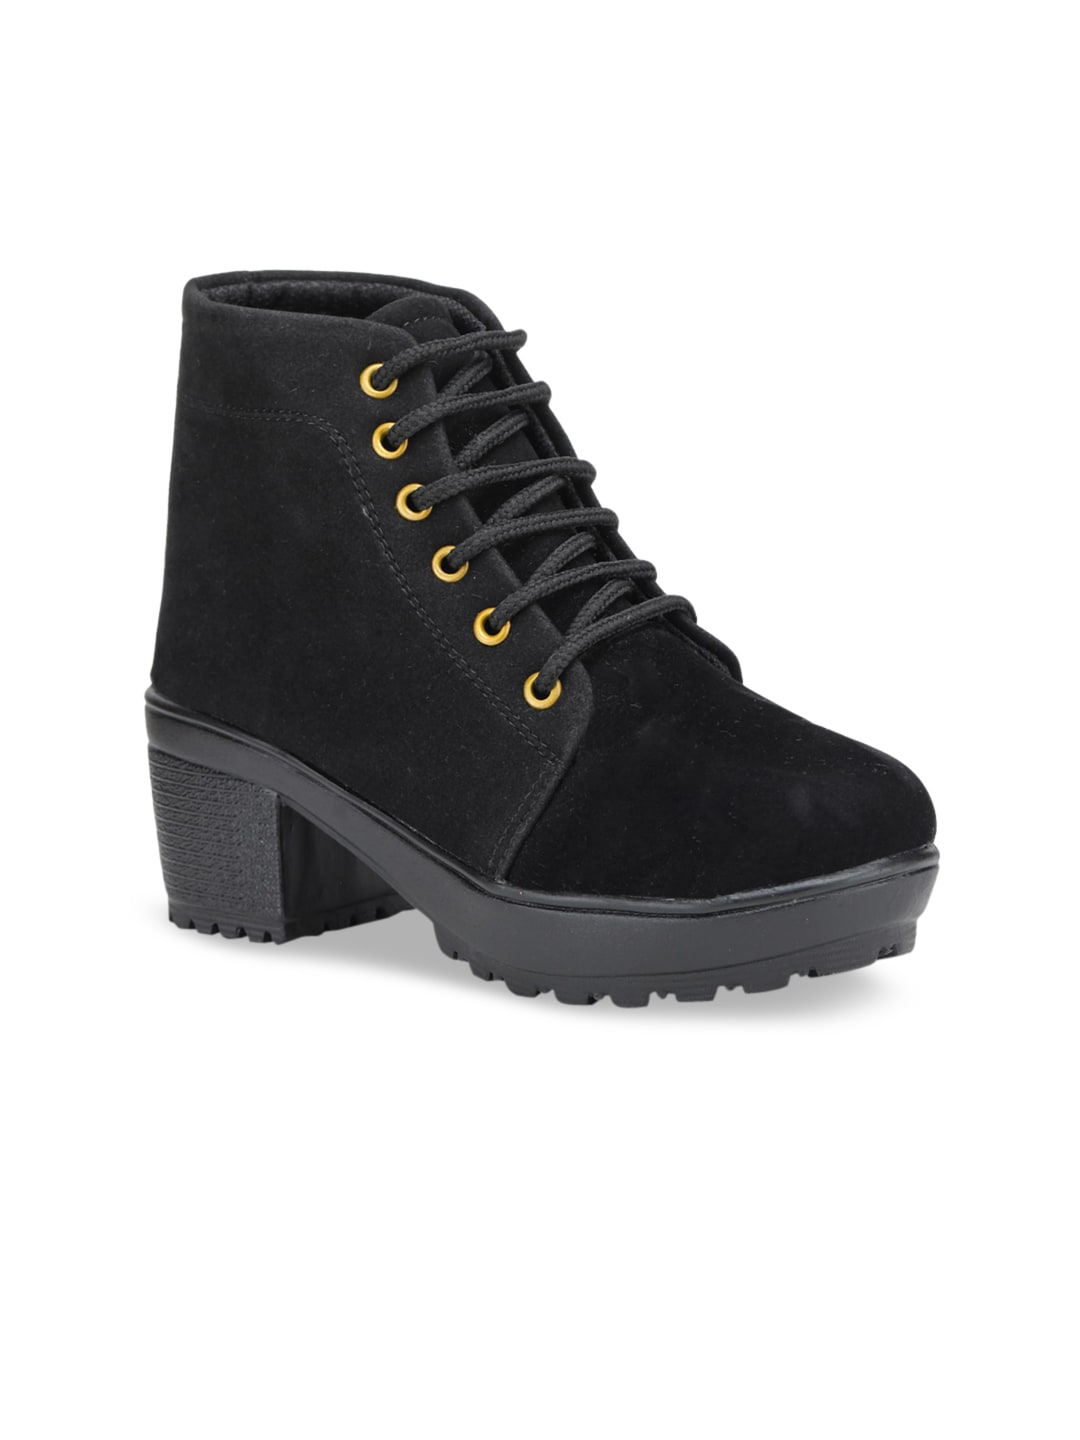 SAPATOS Women Black Flat Boots Price in India